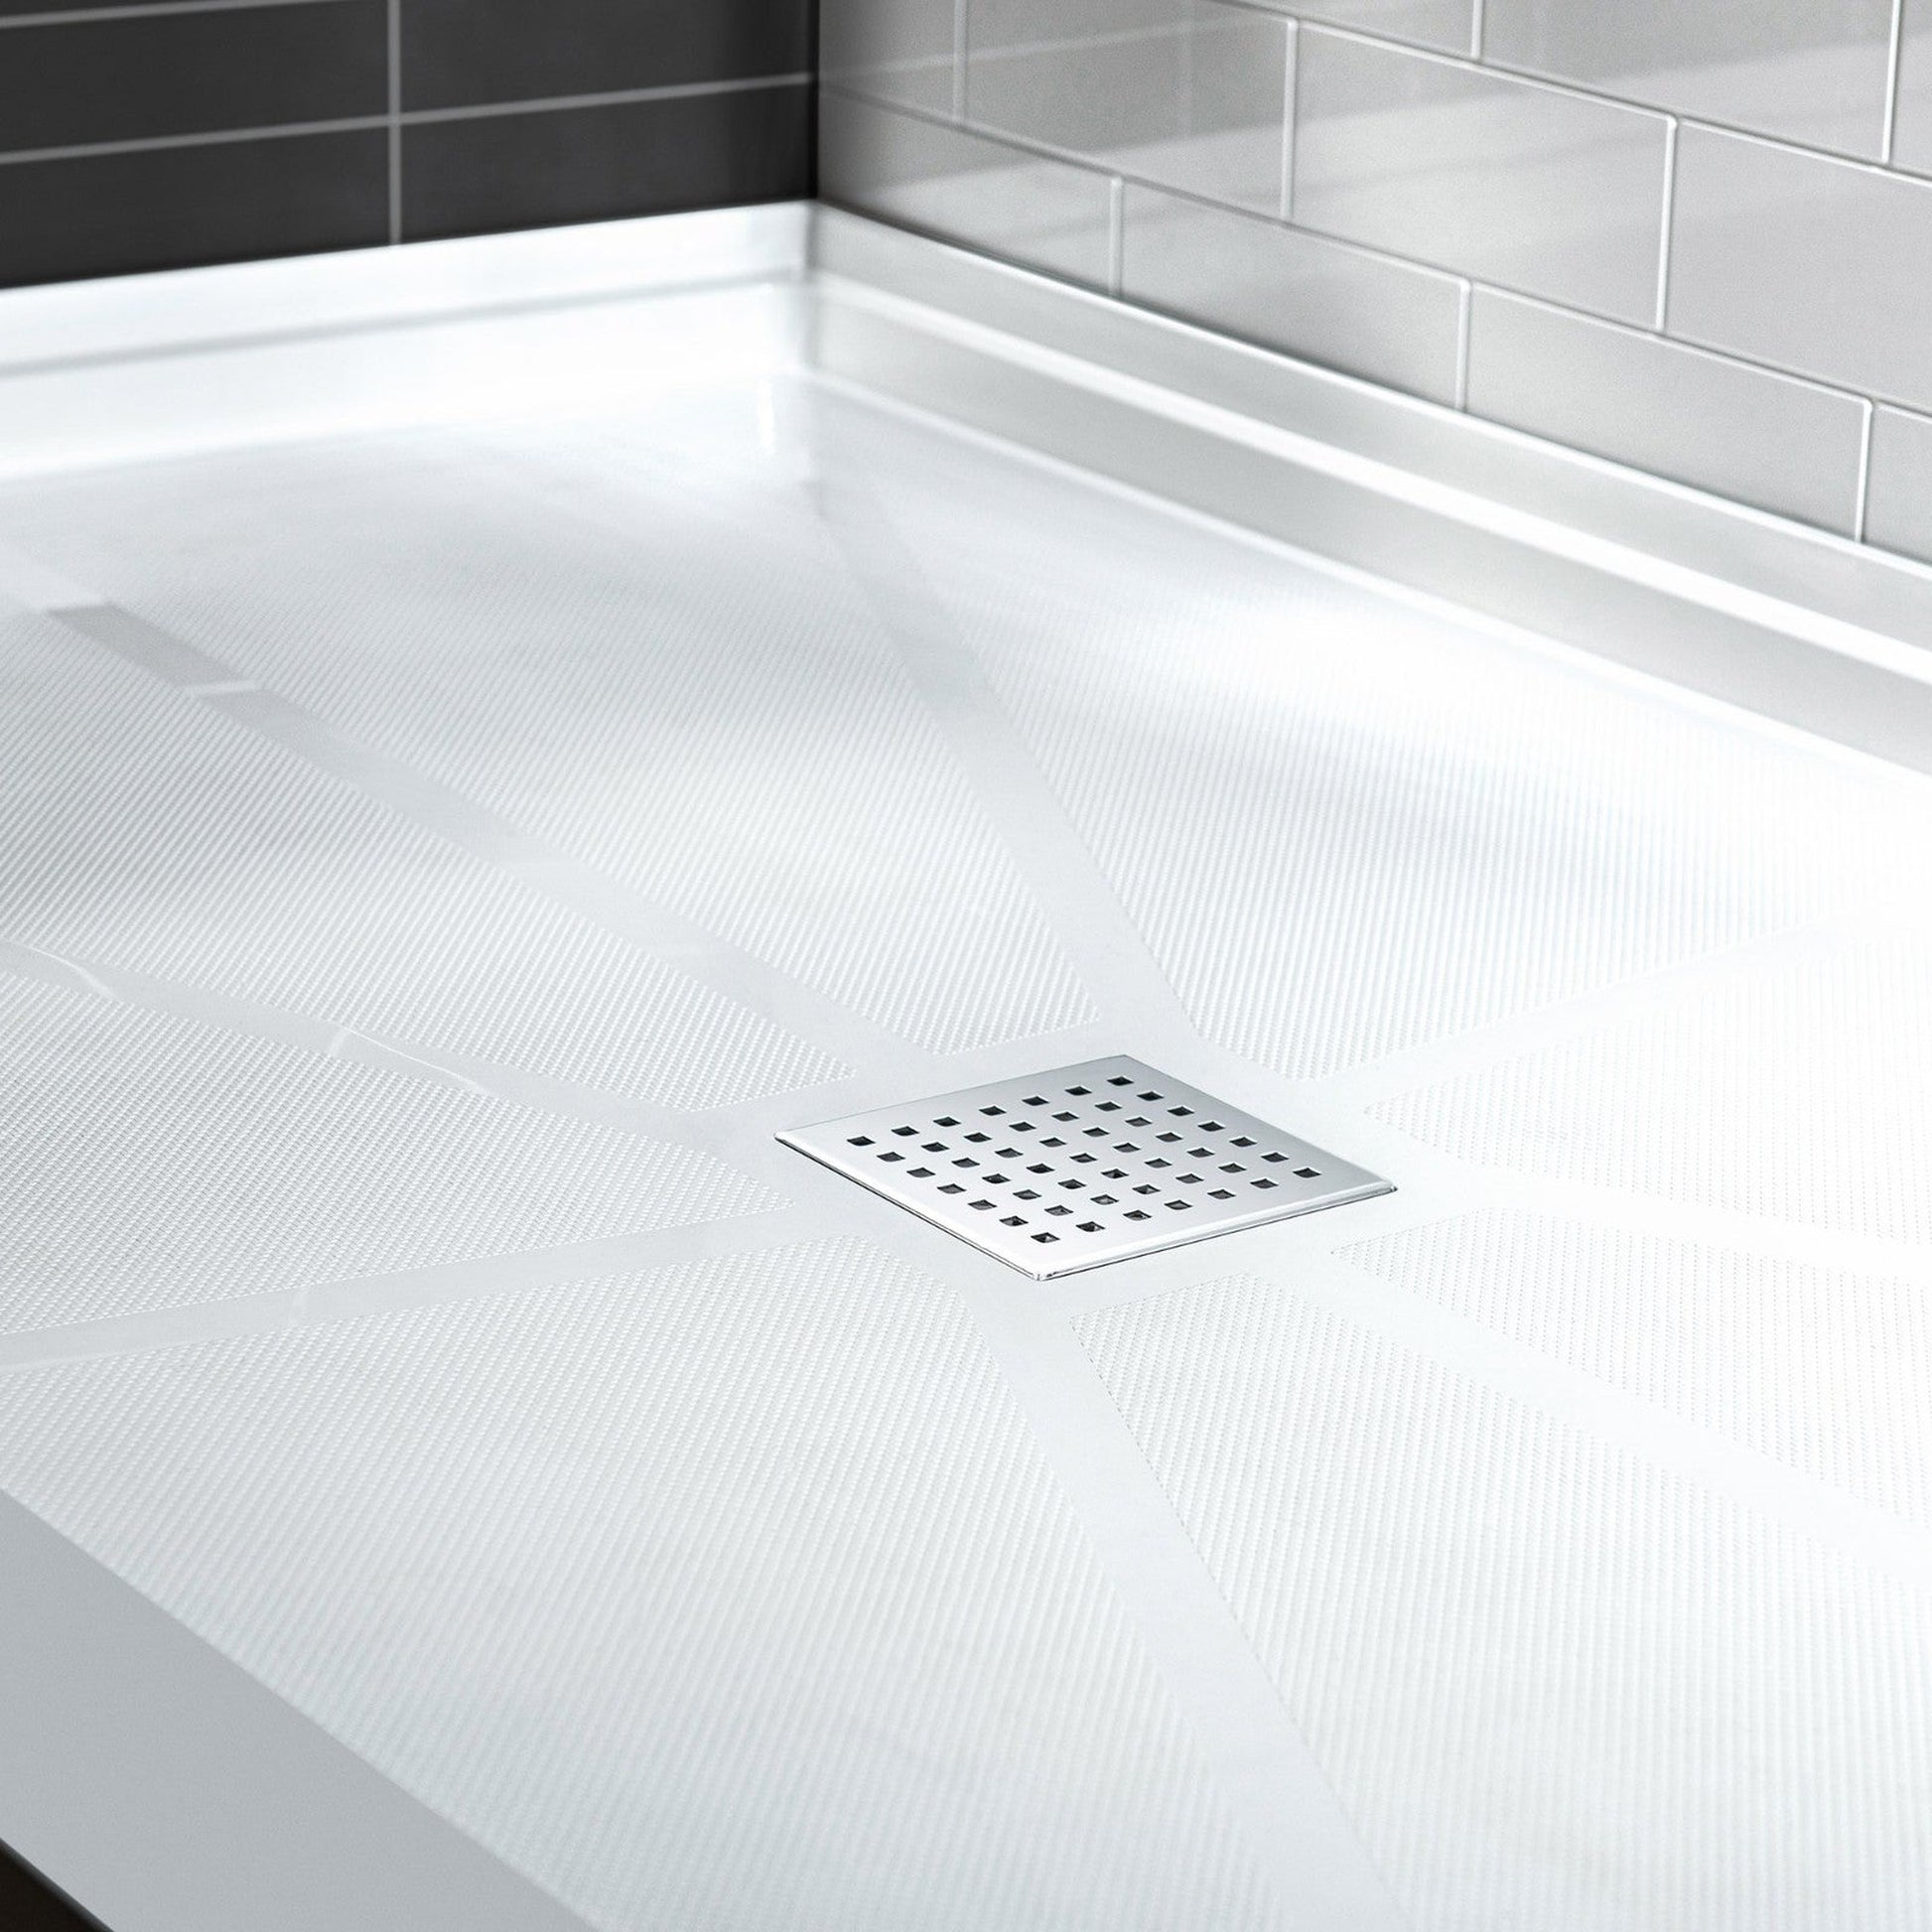 WoodBridge 60" x 32" White Solid Surface Shower Base Center Drain Location With Chrome Trench Drain Cover